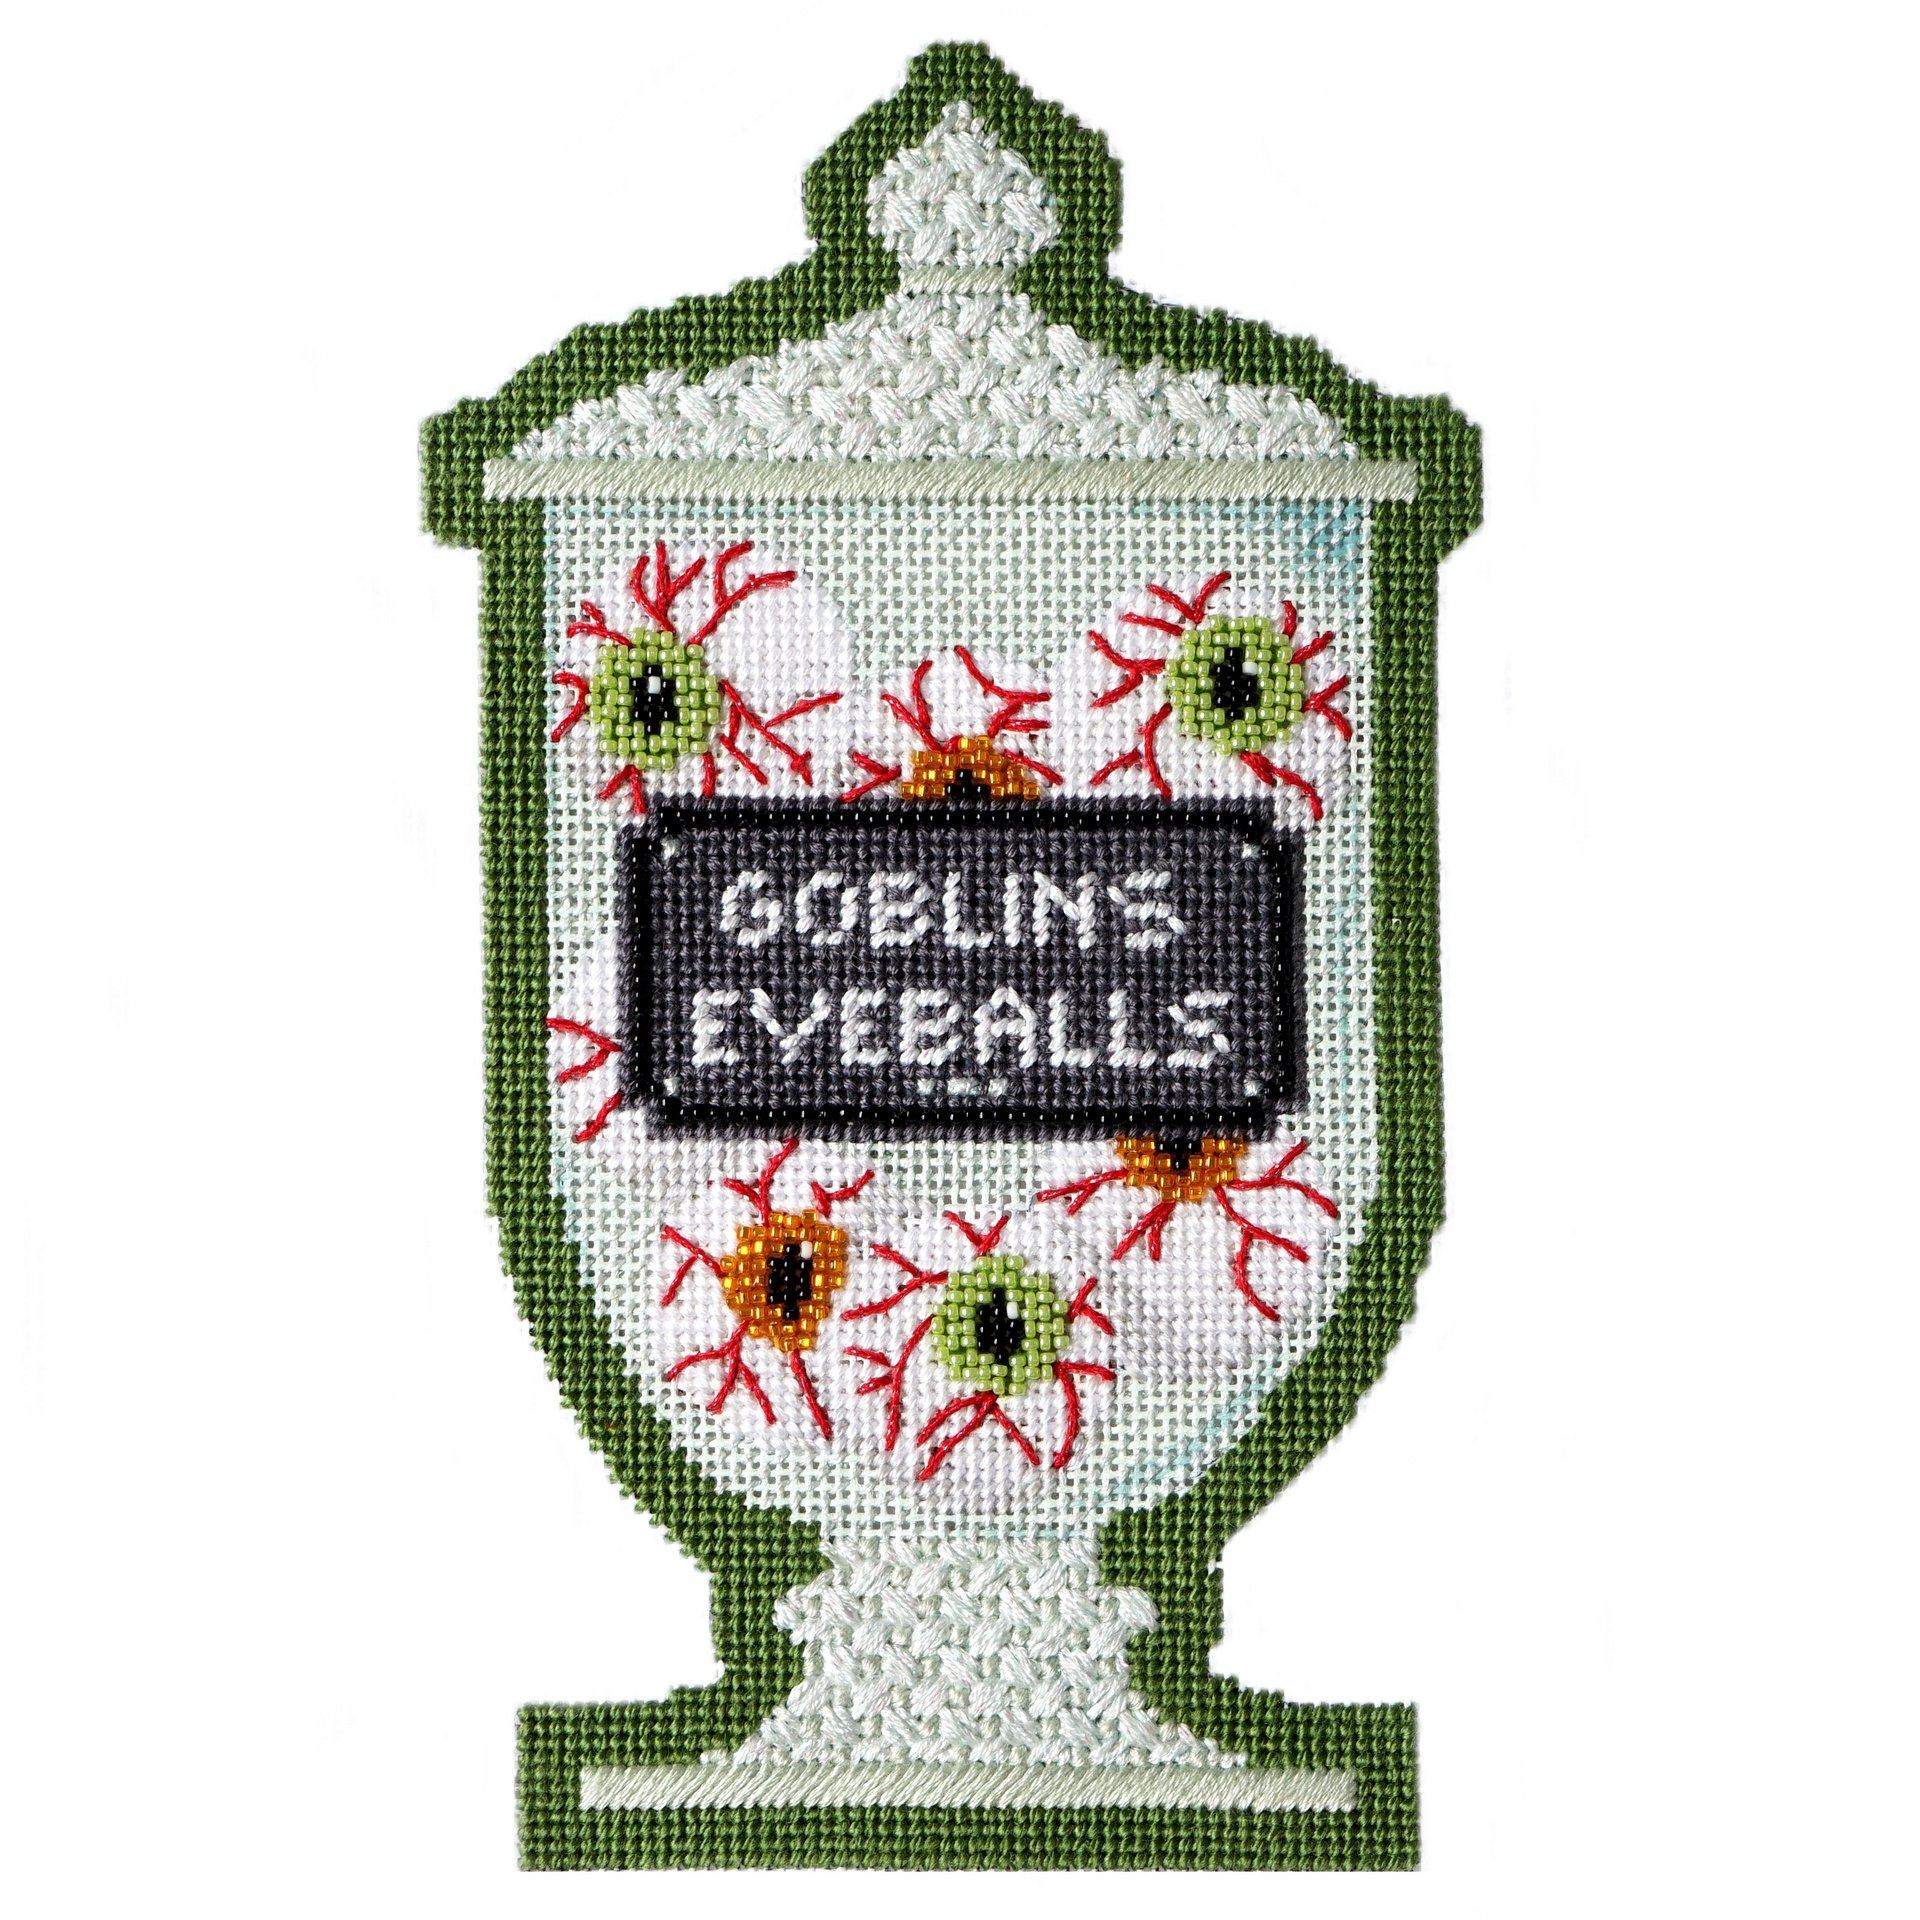 Poison Bottle - Goblins Eyeballs with Stitch Guide Painted Canvas Needlepoint.Com 